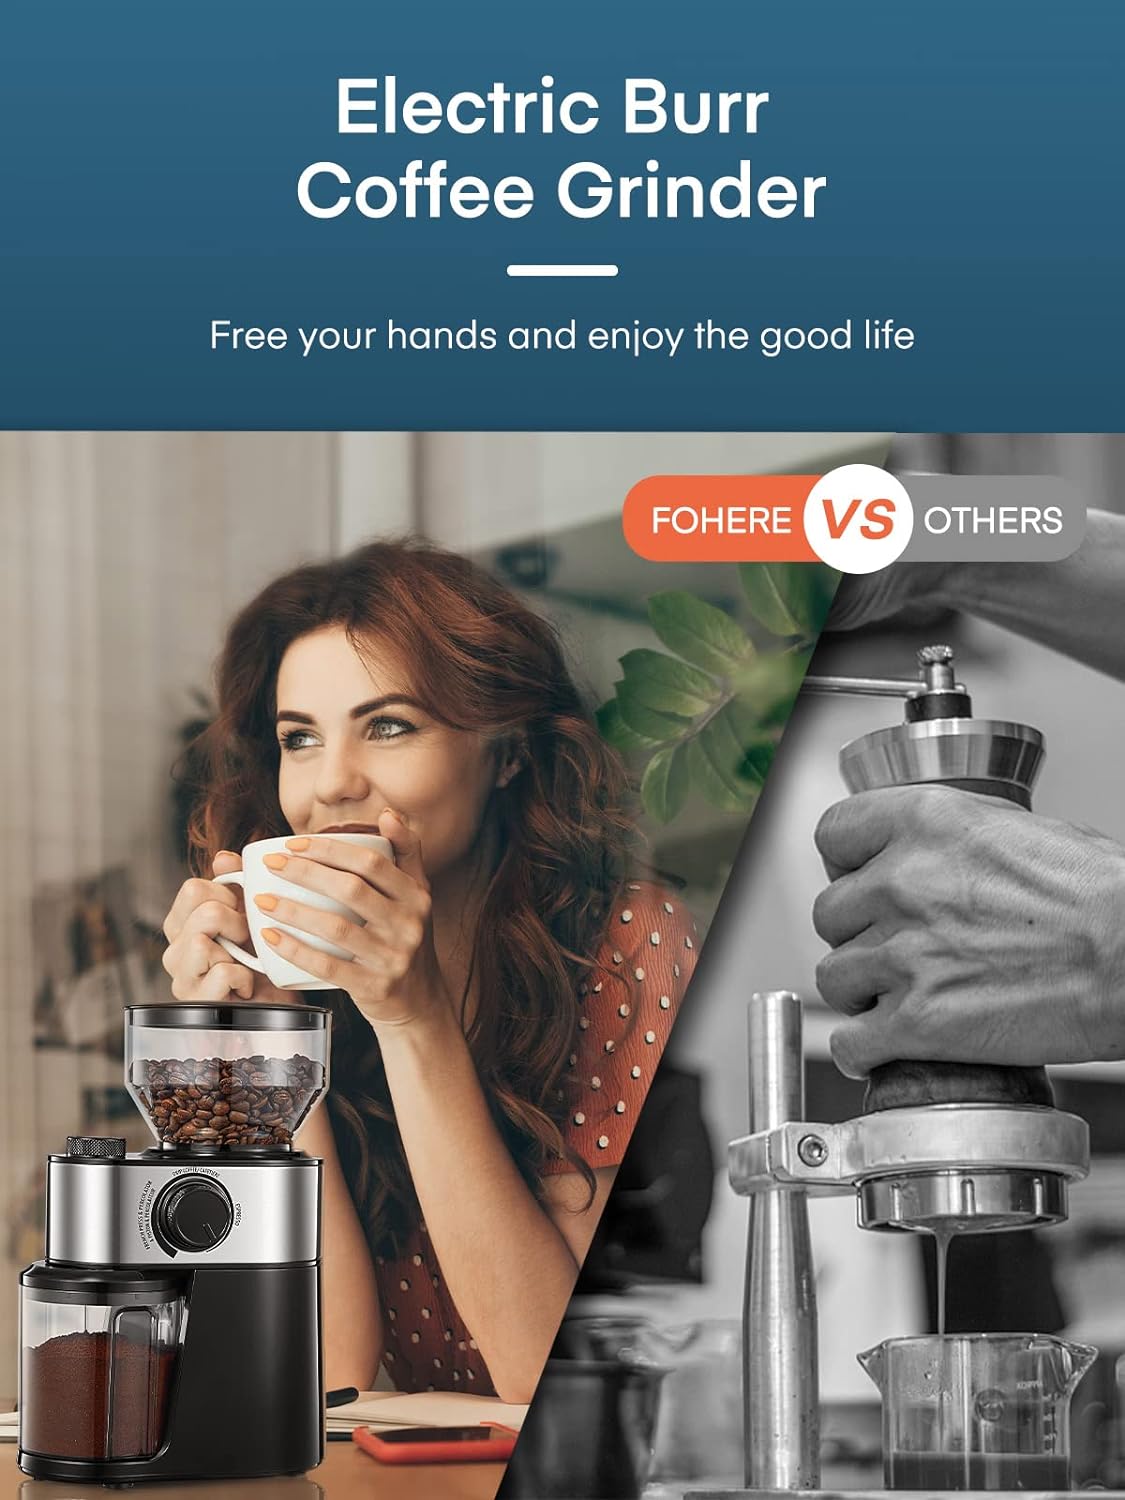 https://bigbigmart.com/wp-content/uploads/2023/10/Electric-Burr-Coffee-Grinder-FOHERE-Coffee-Bean-Grinder-with-18-Precise-Grind-Settings-2-14-Cup-for-Drip-Percolator-French-Press-Espresso-and-Turkish-Electric-Coffee-Makers-Black6.jpg